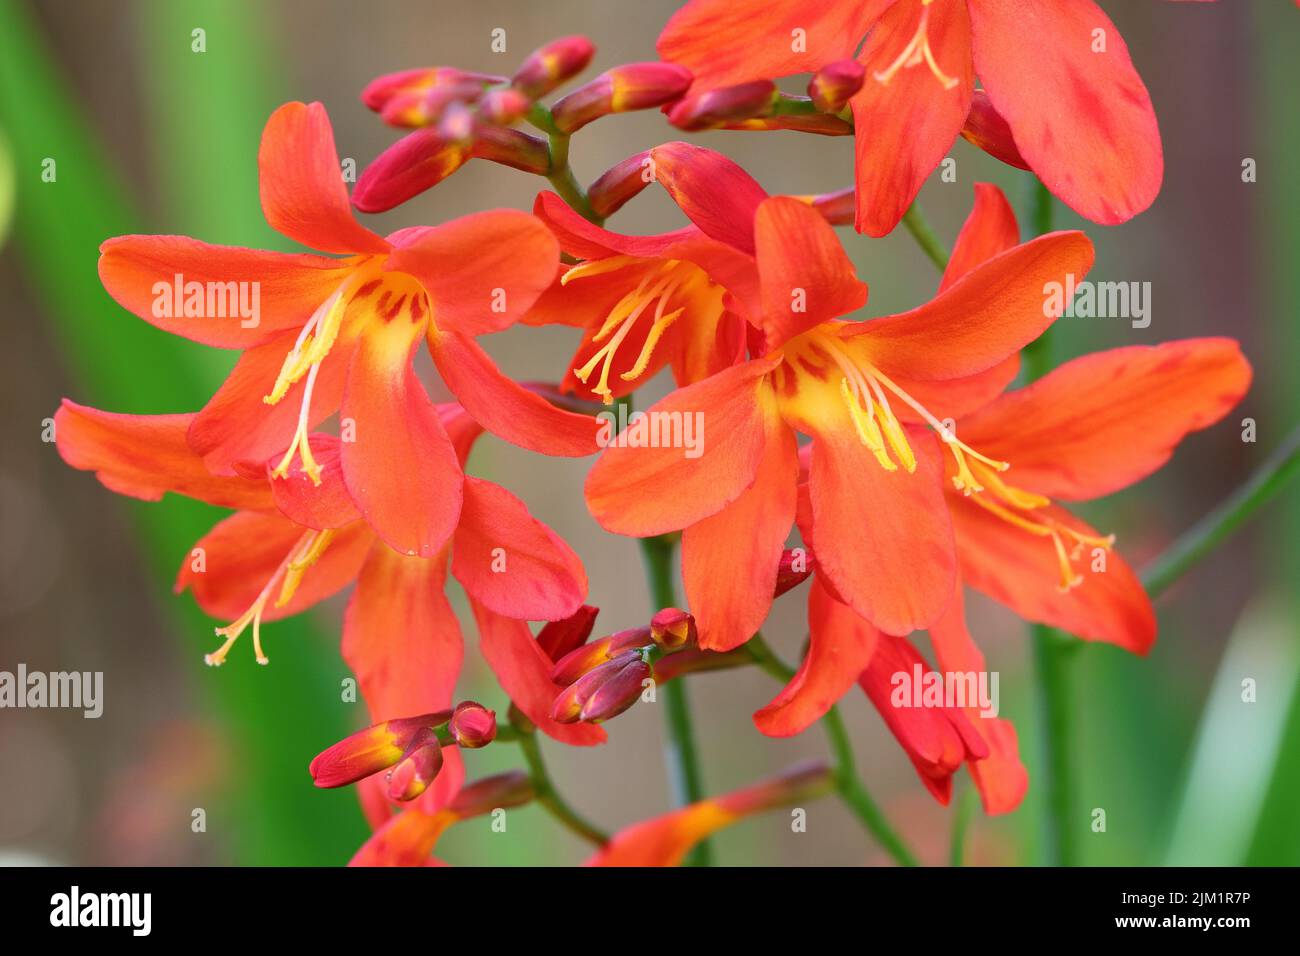 close-up of beautiful red-orange Crocosmia flowers against a blurry background Stock Photo